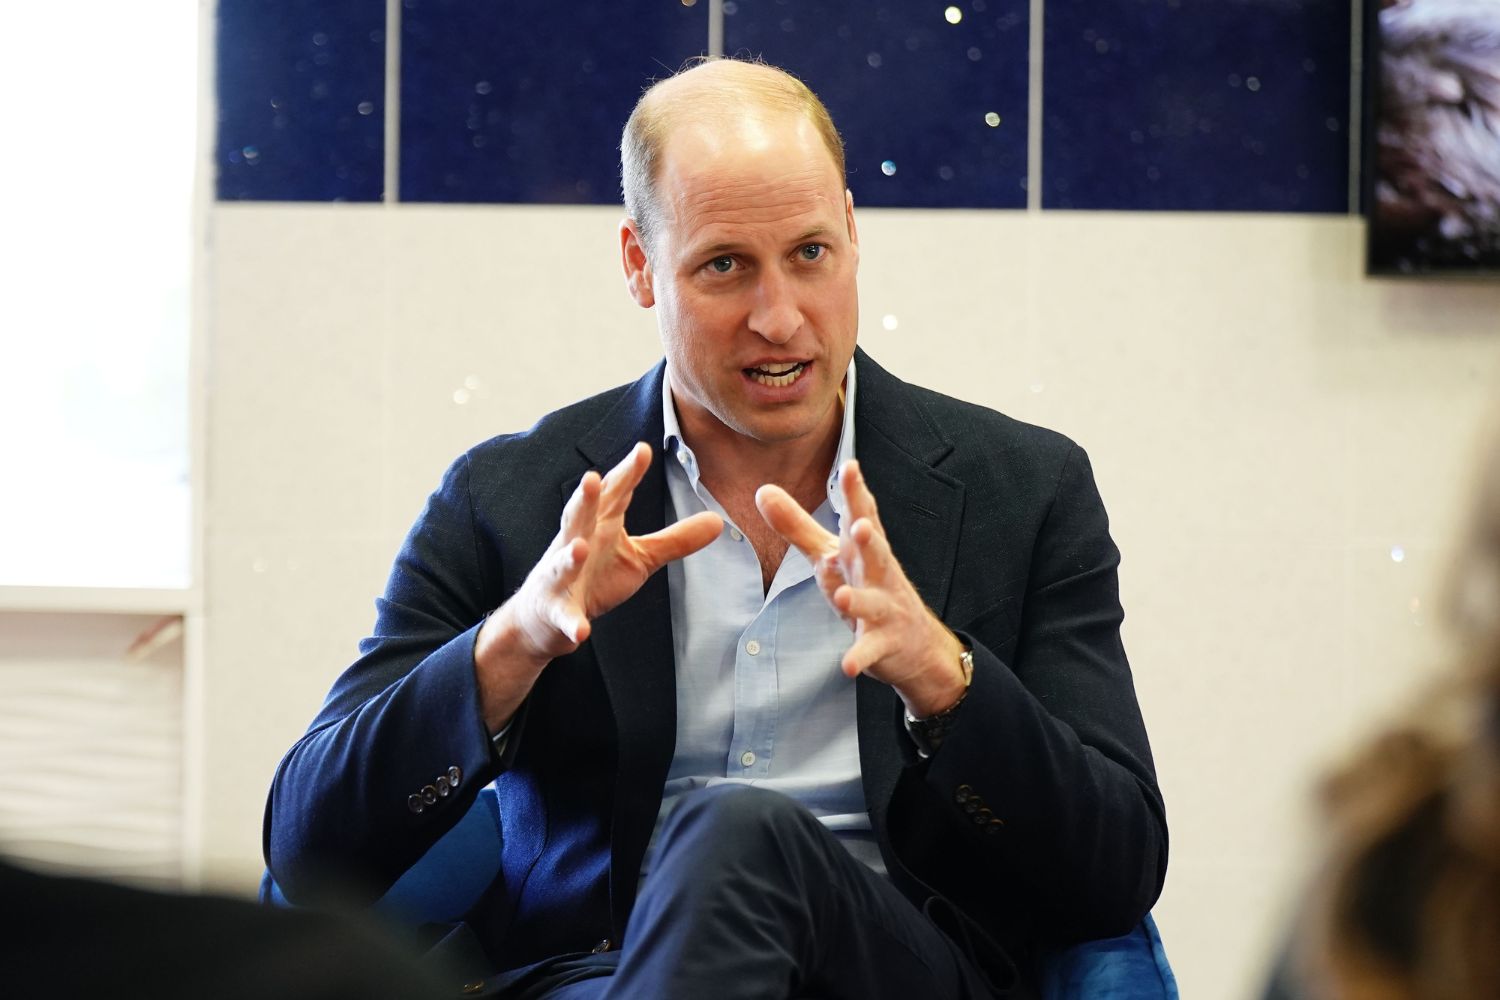 prince-william-sitting-in-chair-talking